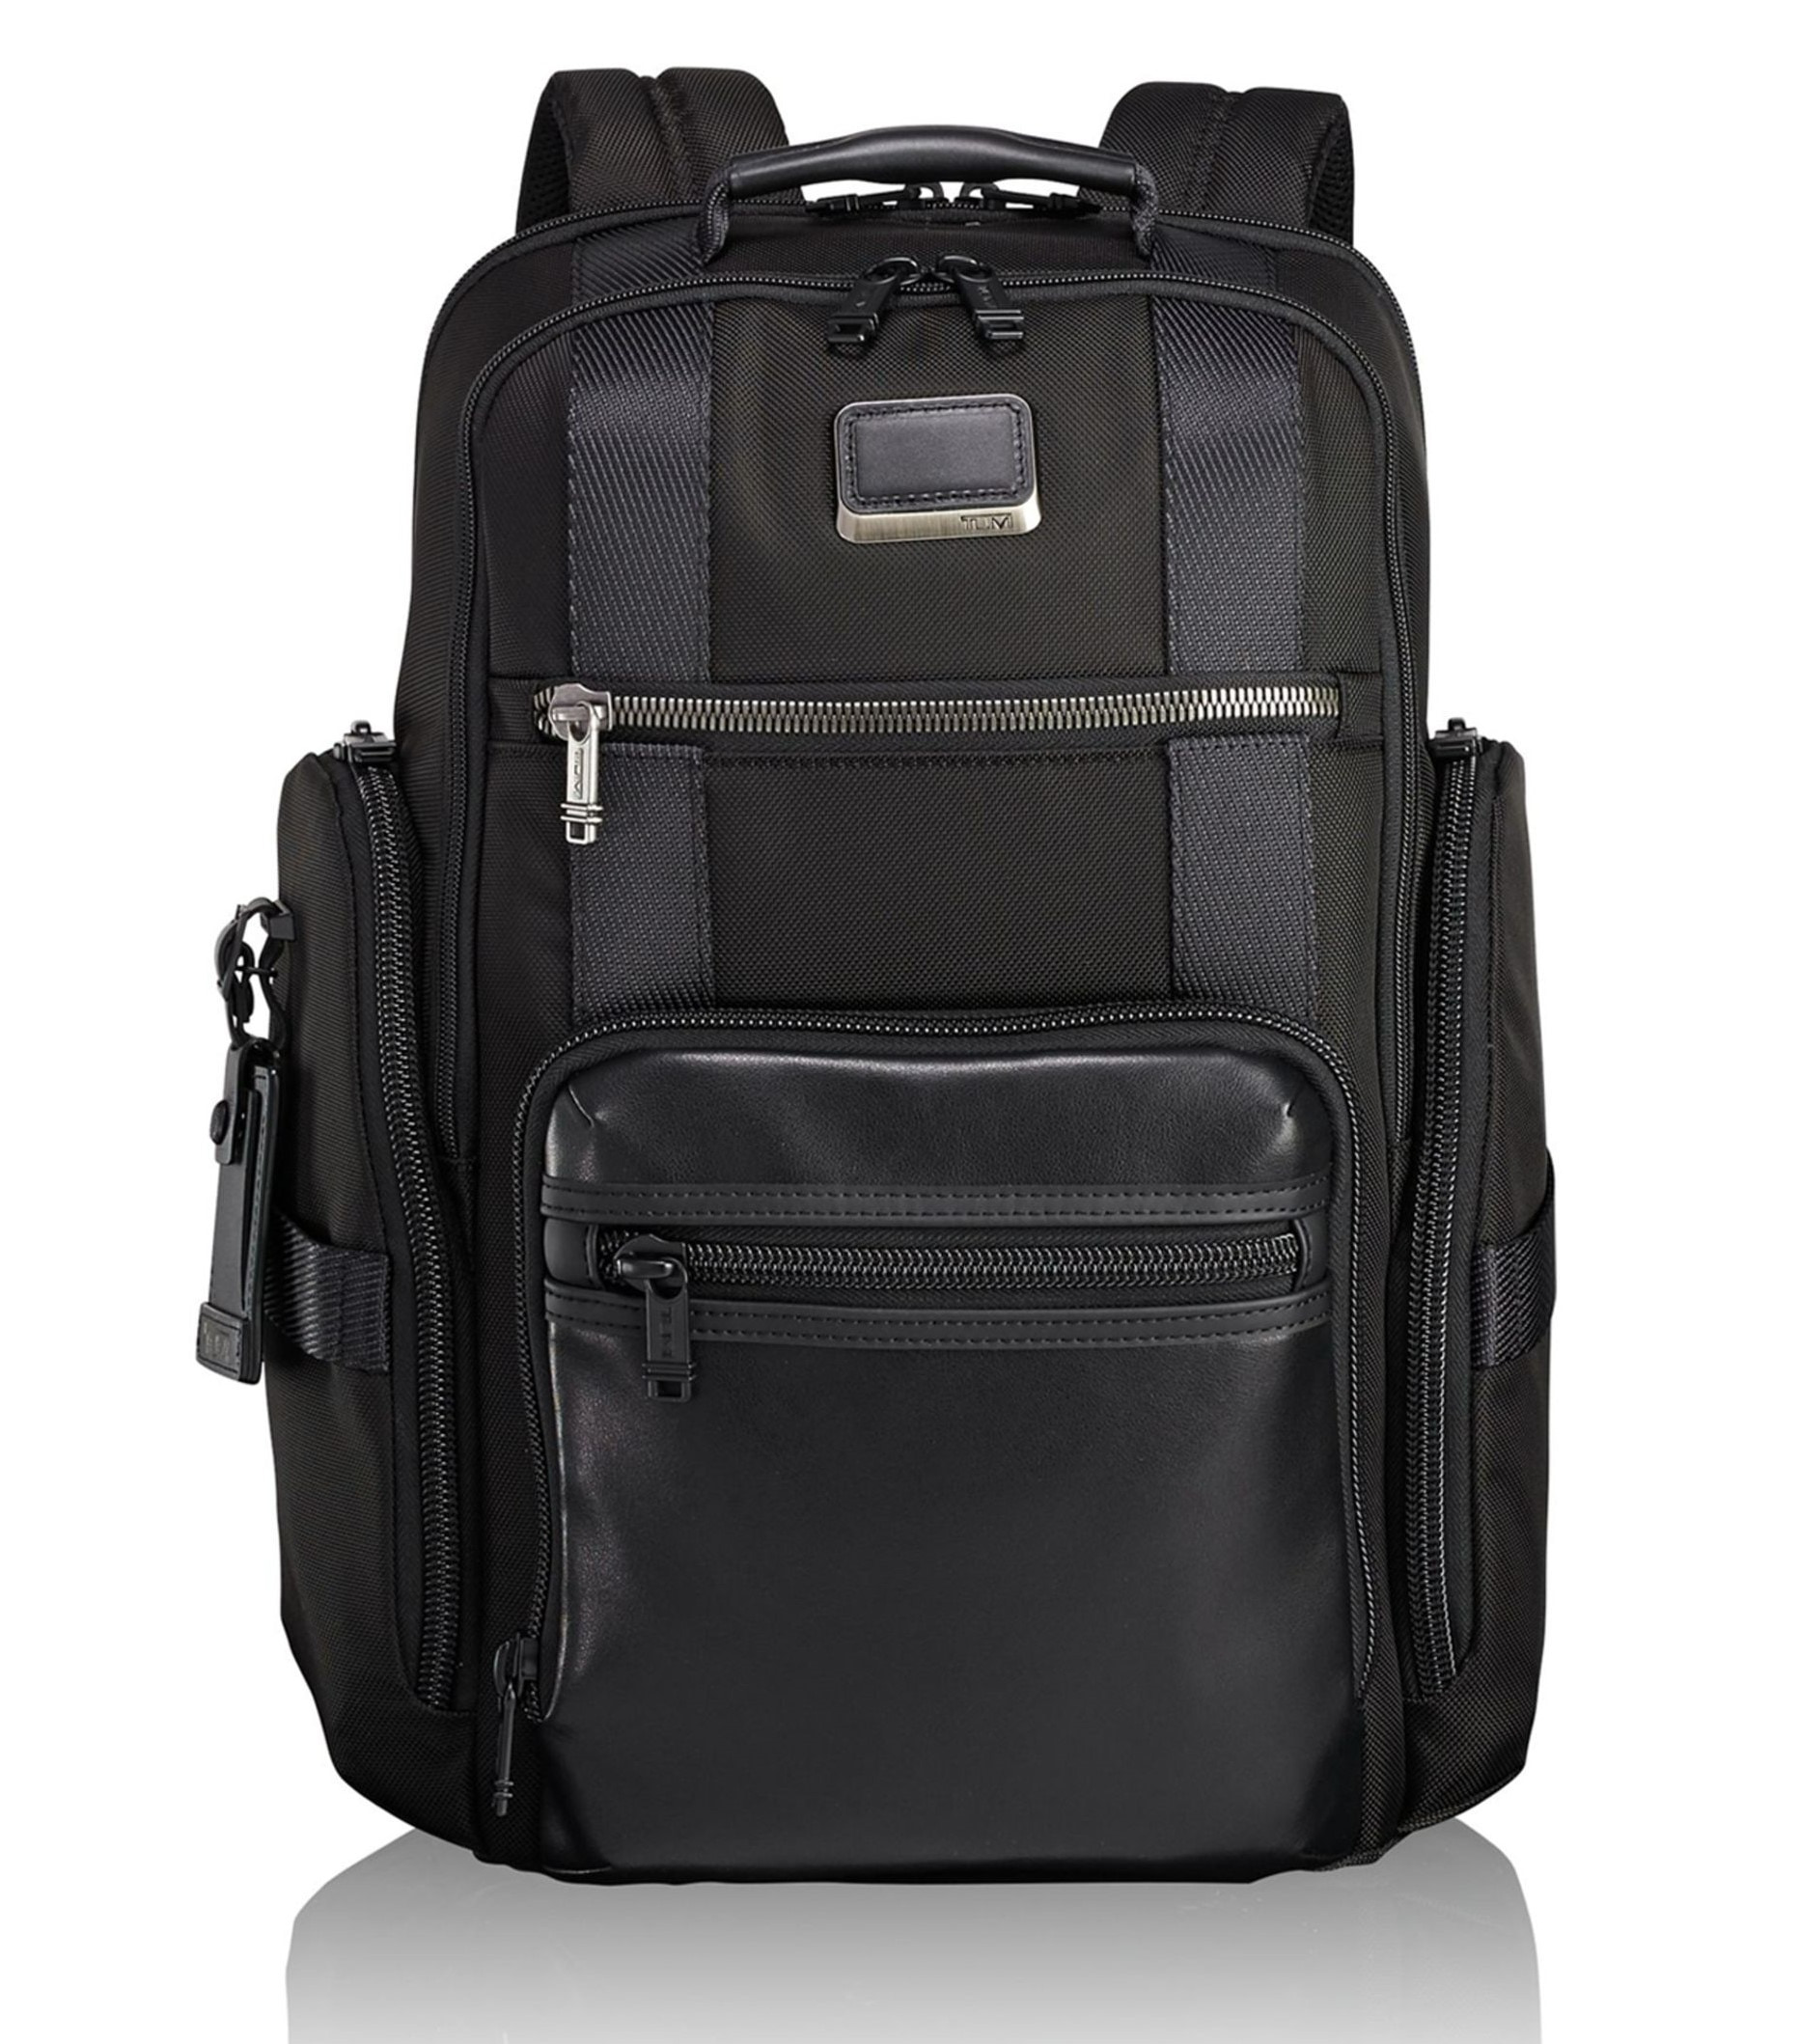 BALO TUMI SHEPPARD DELUXE BRIEF PACK ALPHA BRAVO BACKPACK 17